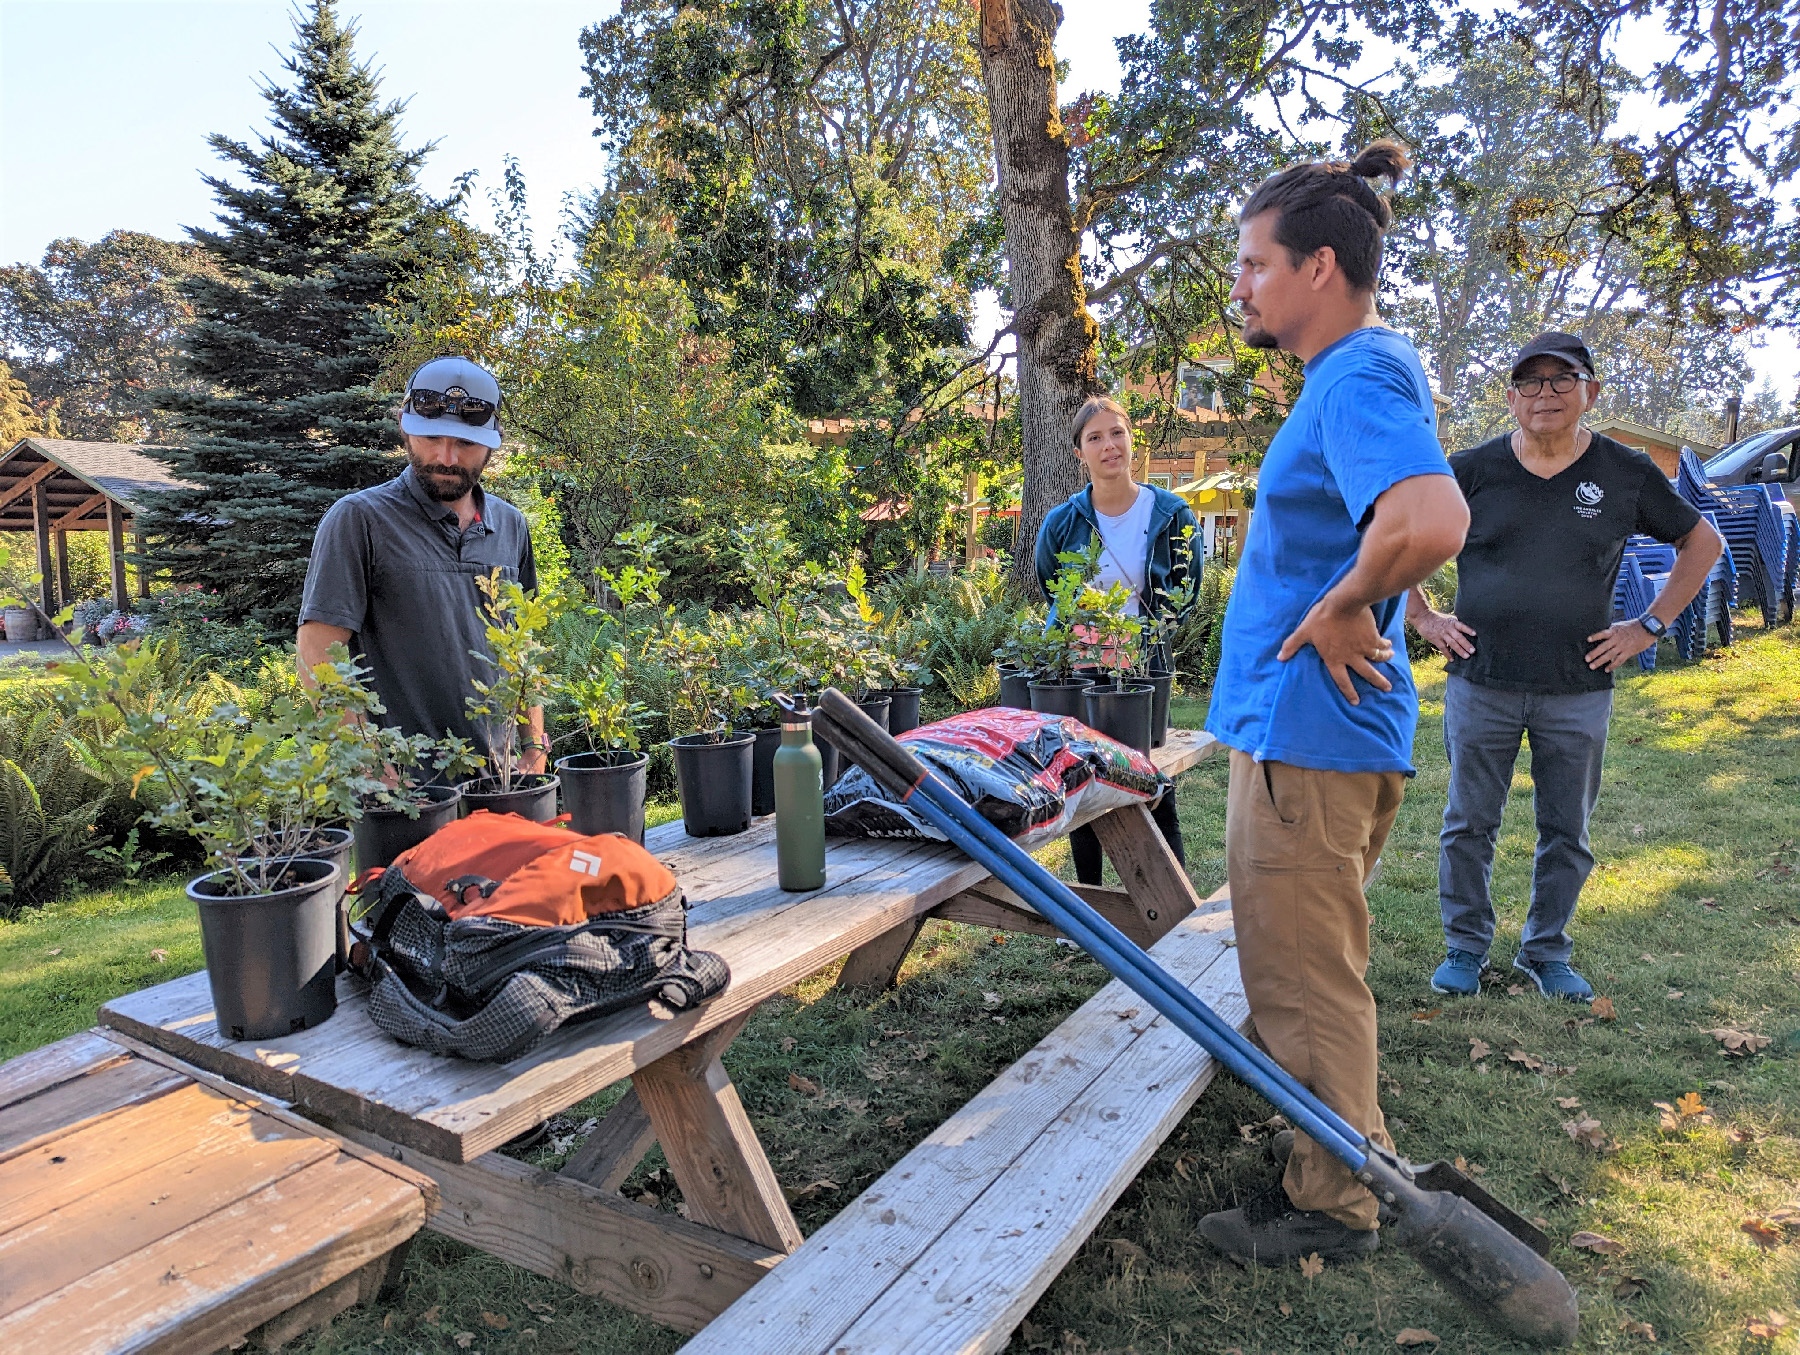 Left Coast Winery CEO Taylor Pfaff (wearing the blue T-shirt) talks with stewardship project participants as they prepare to plant white oak saplings in Rickreall, Oregon.